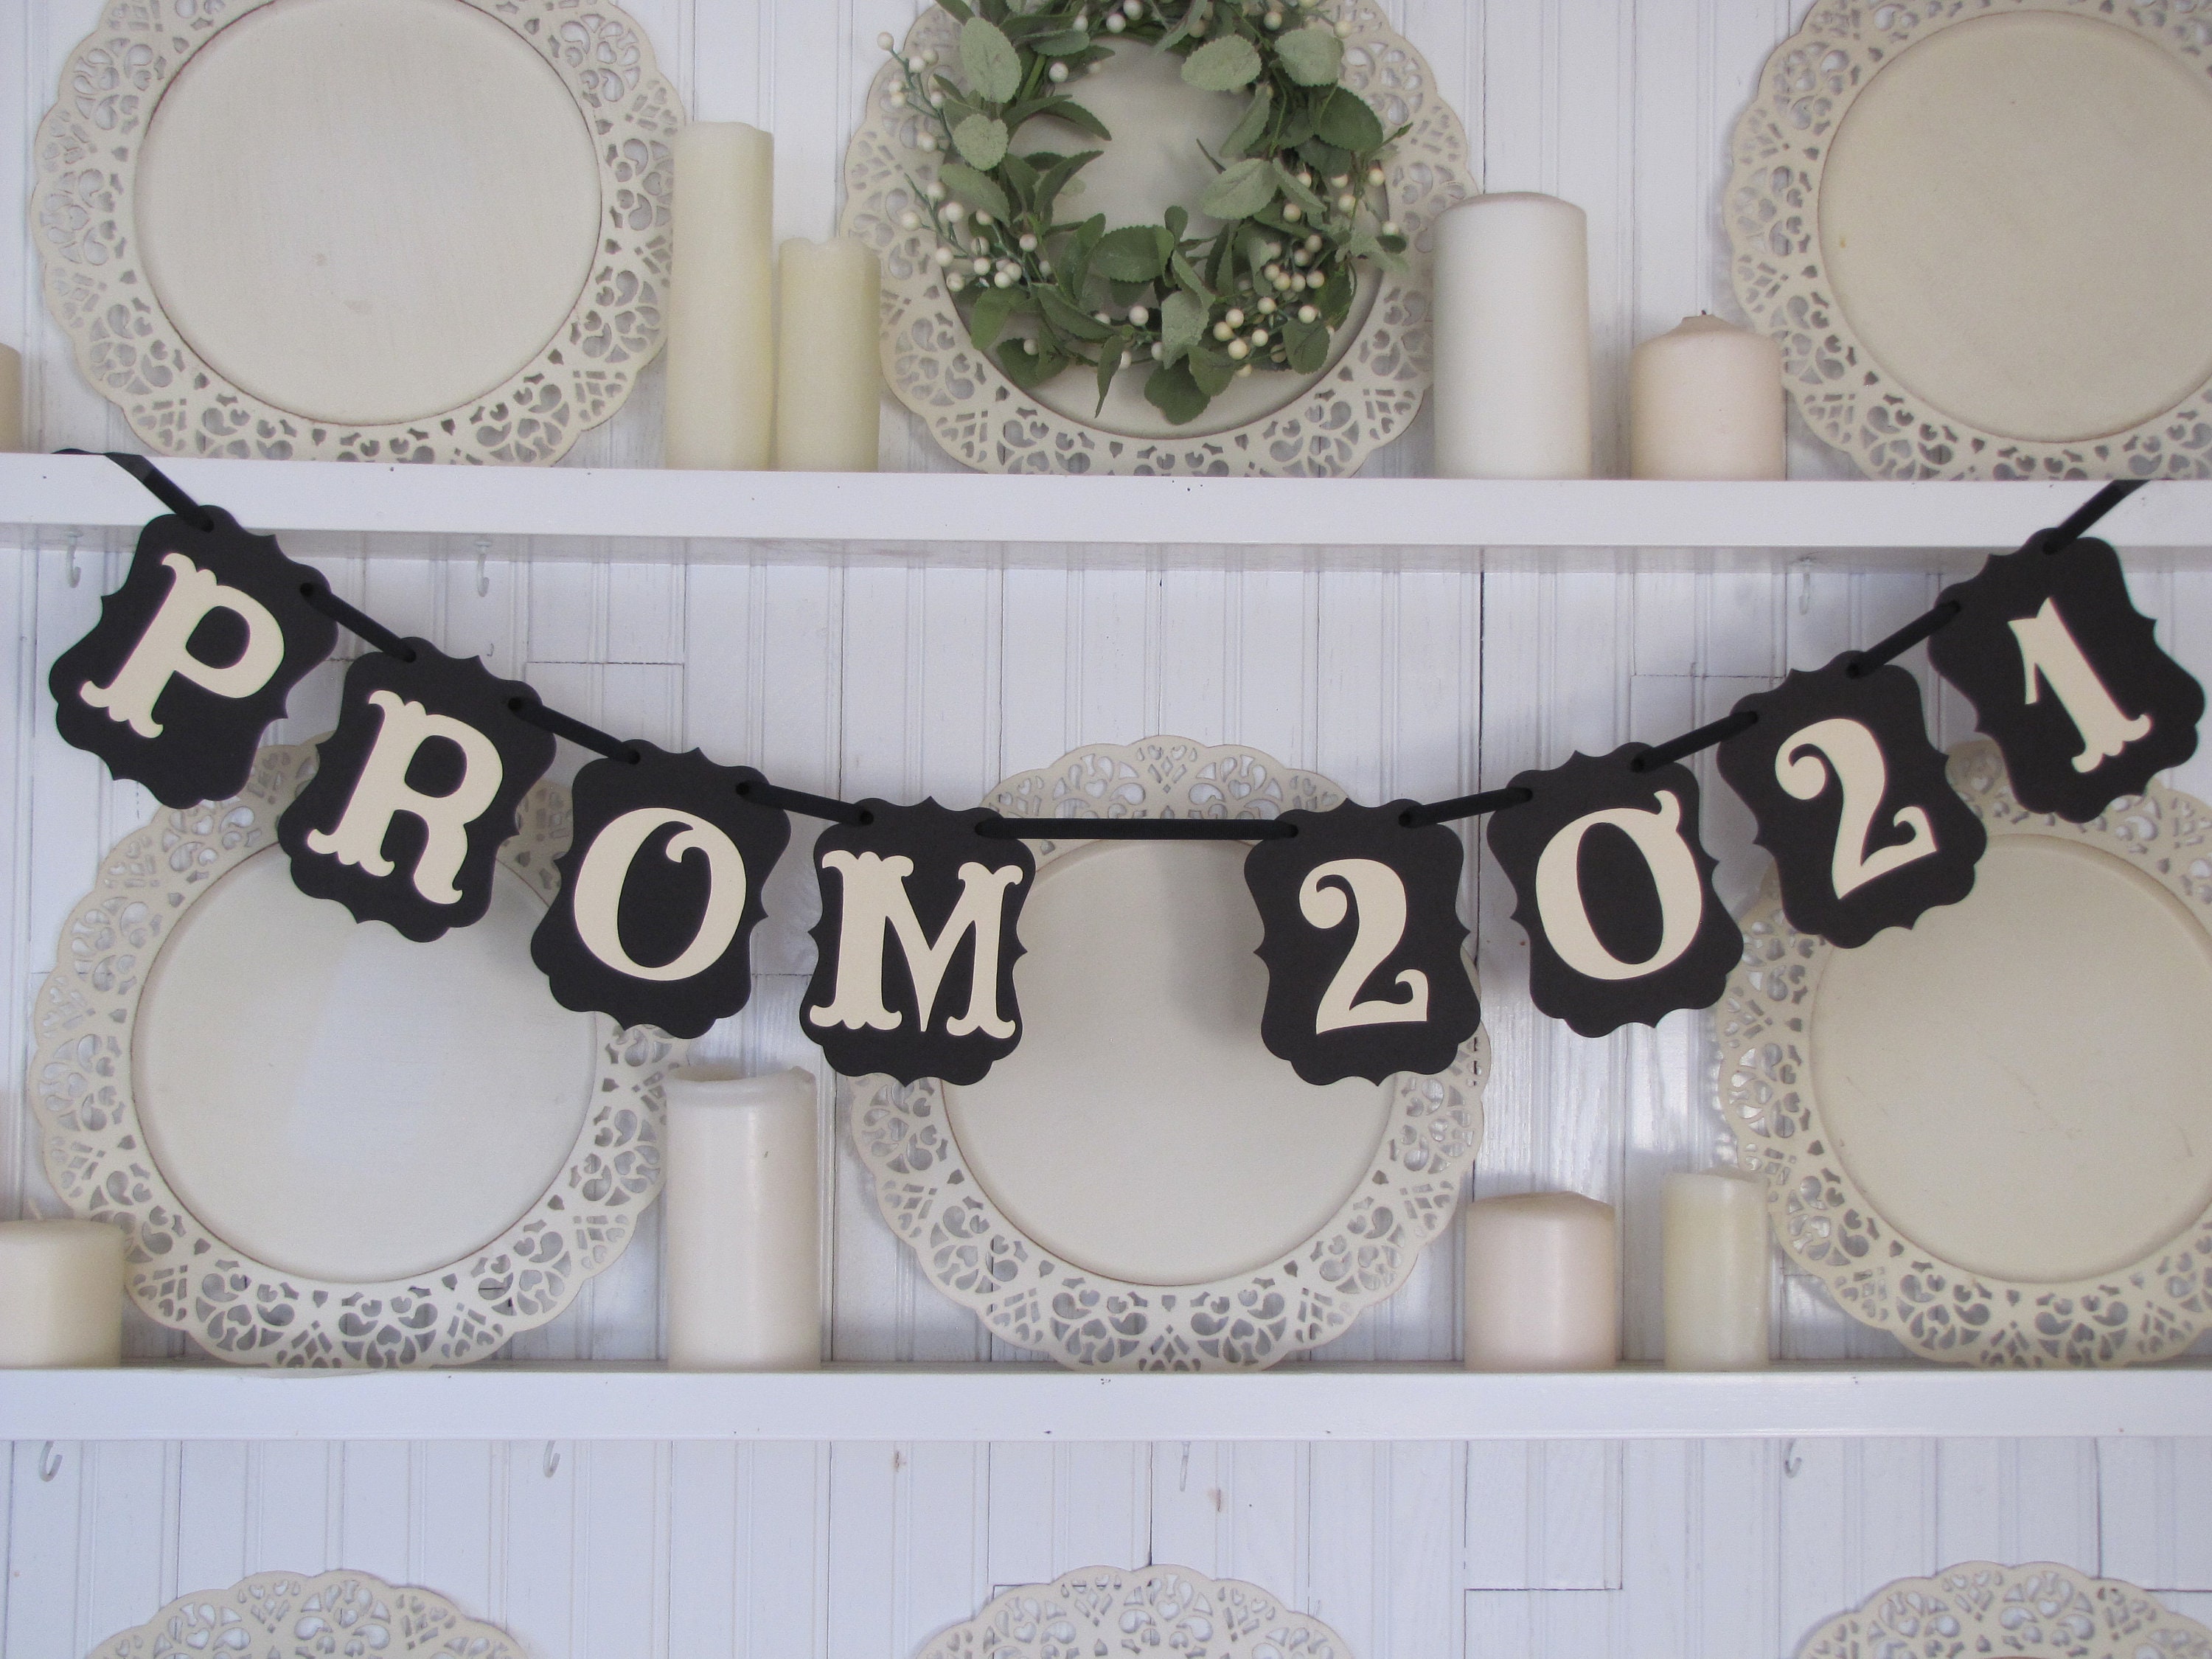 PROM 2021 Banner Prom Decoration Prom Sign Prom 2021 High Etsy